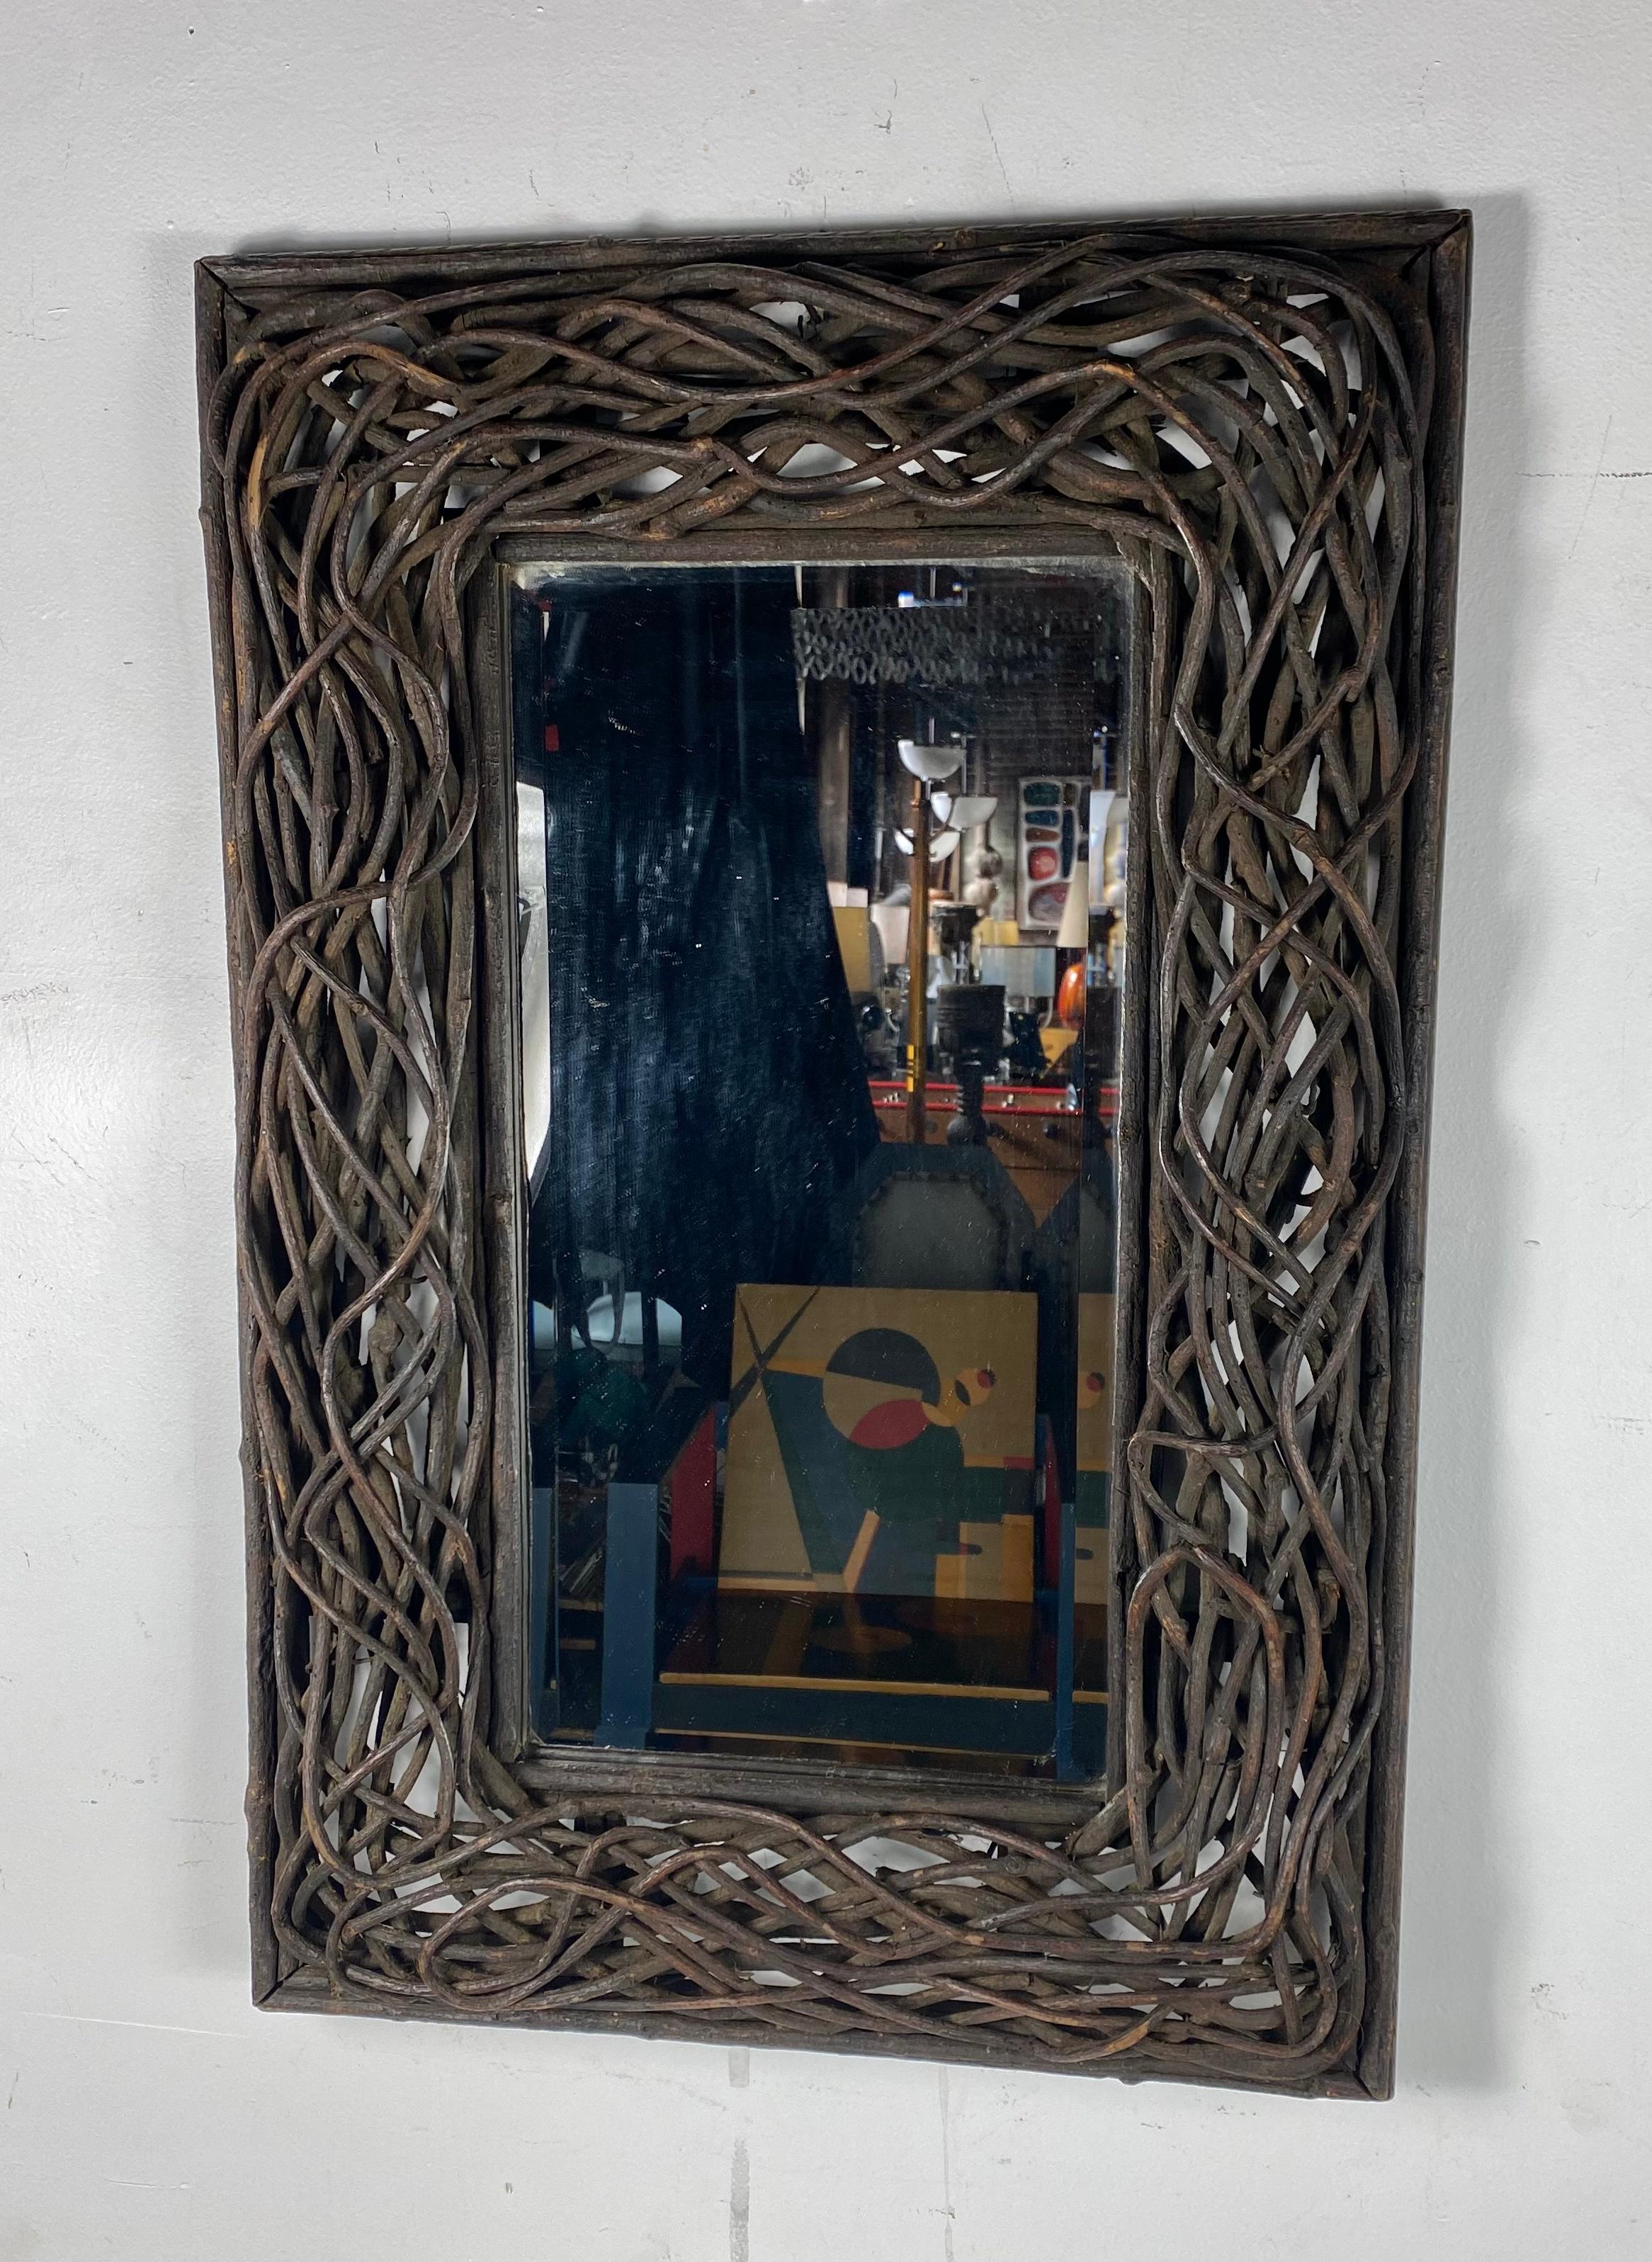 Large oversized twig / branch mirror with beveled glass, adirondak- rustic, stunning design, almost Art Nouveau in style and design, great quality.